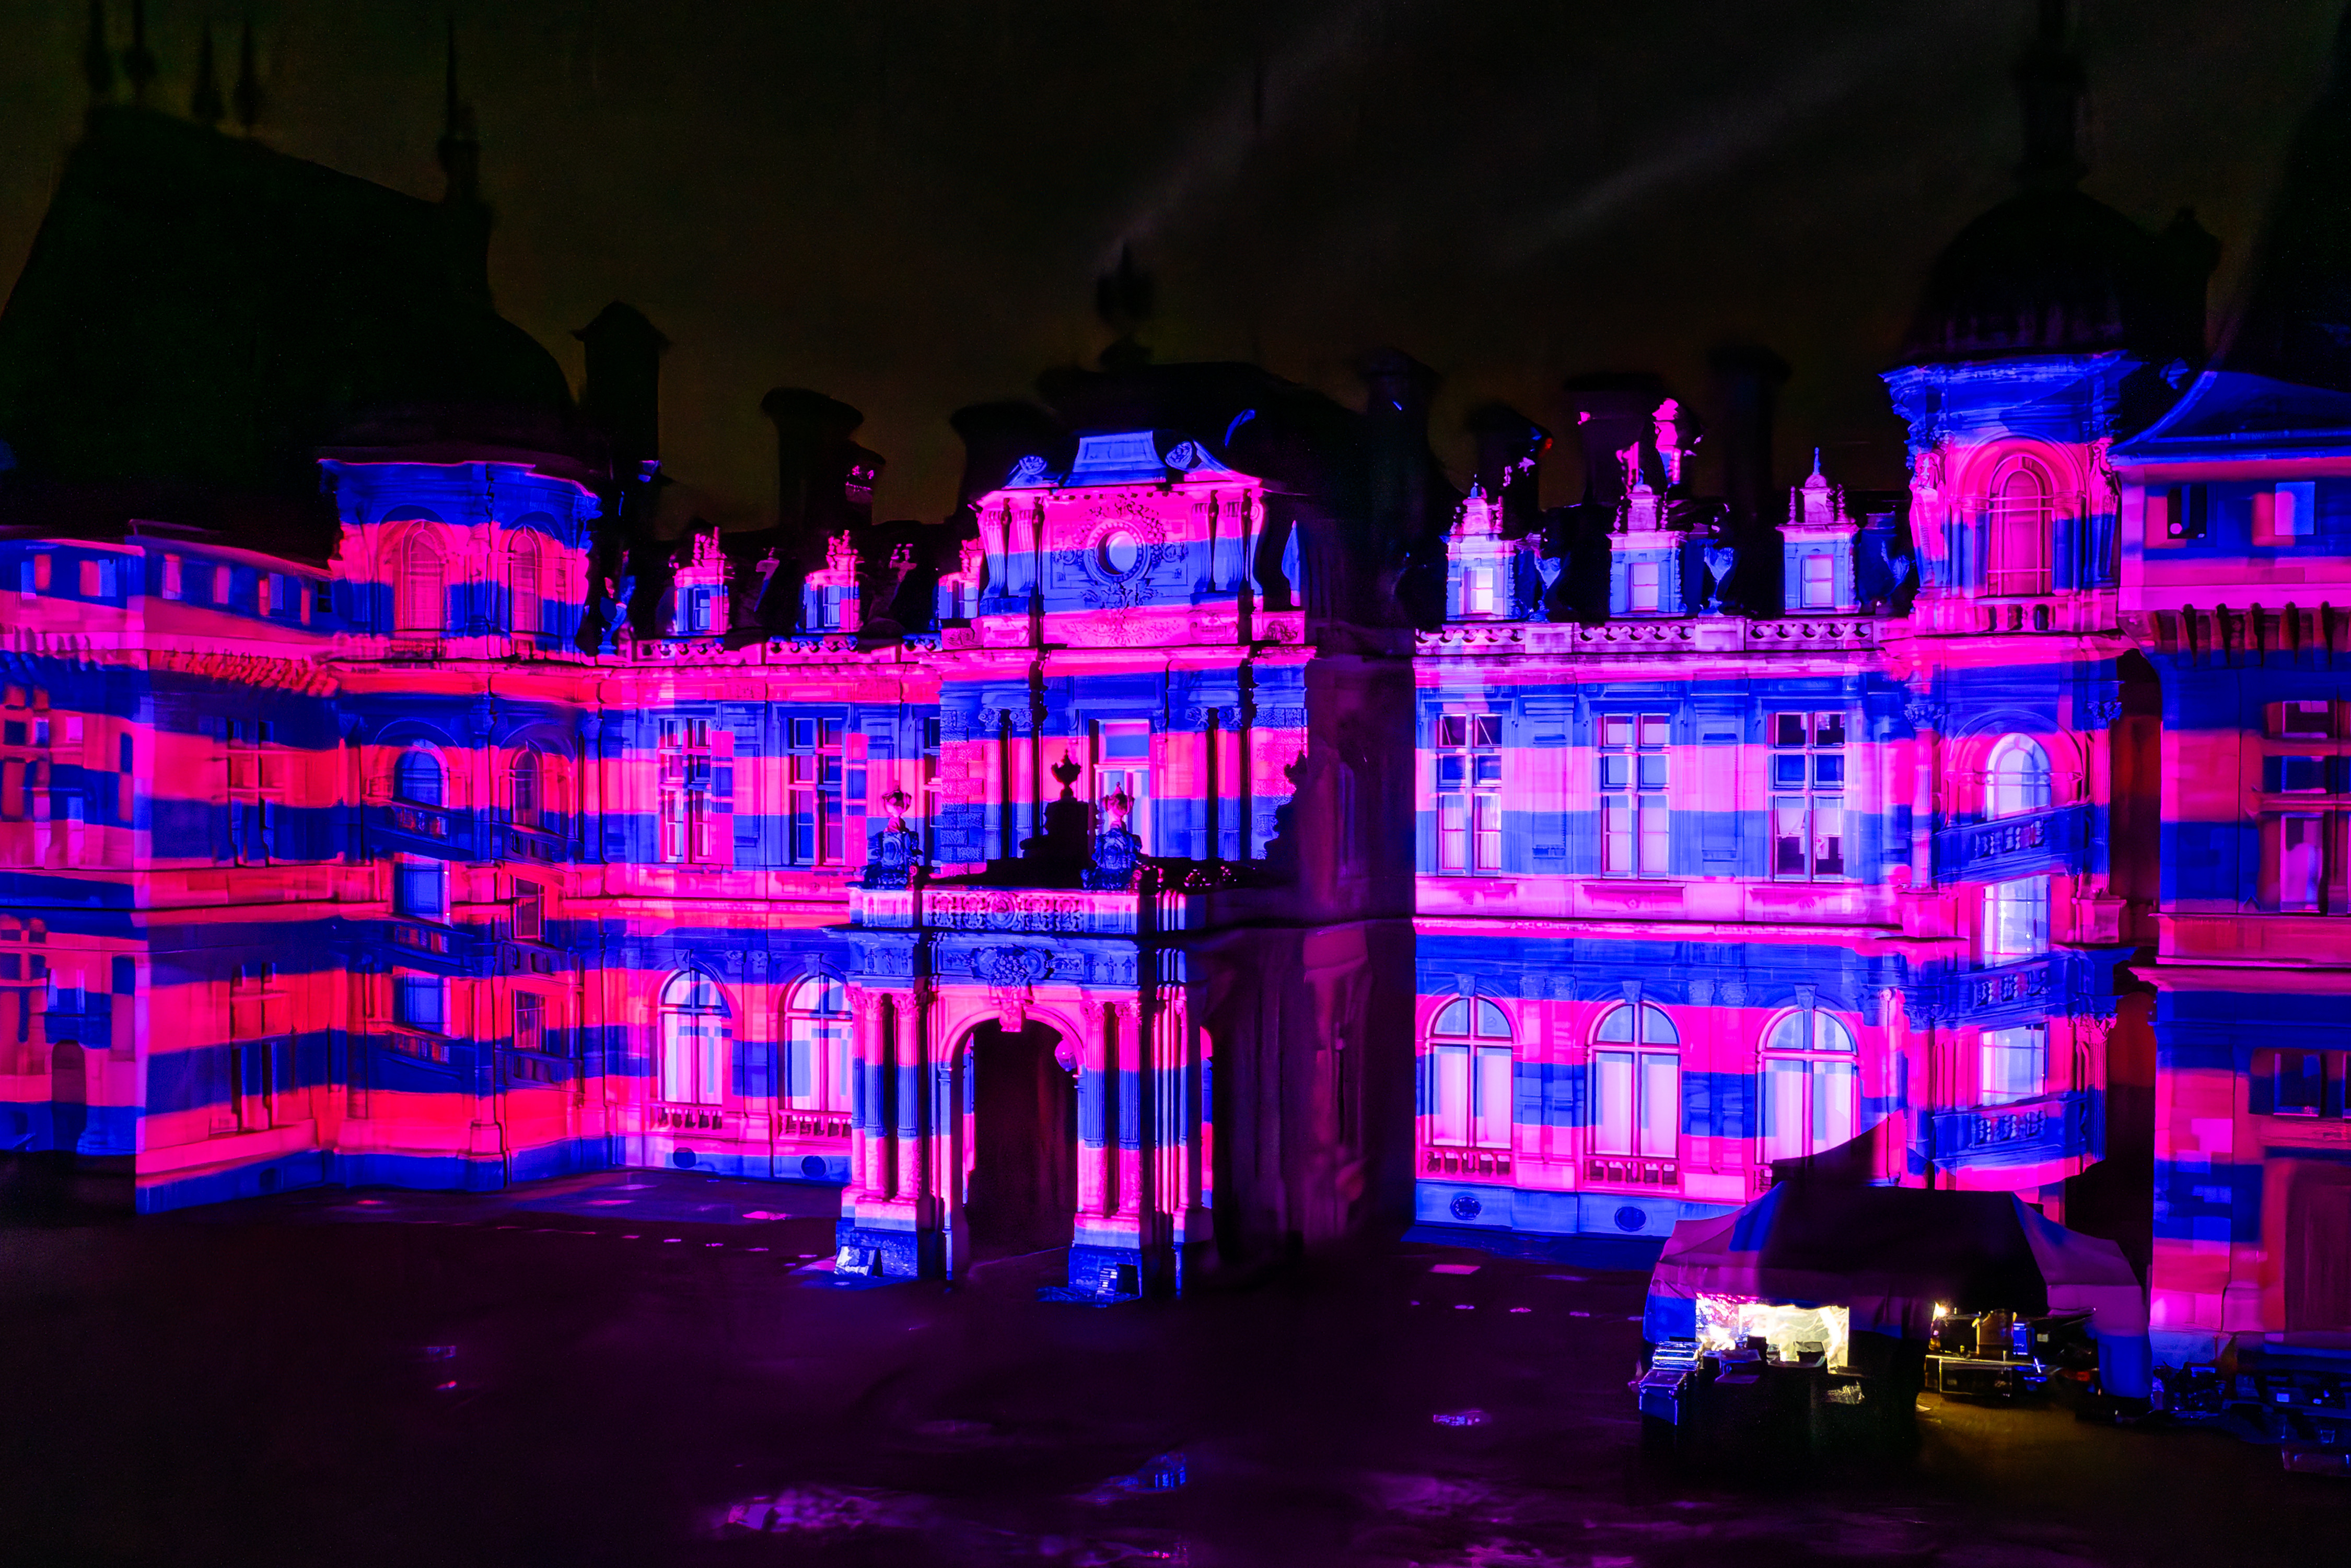 Video - Waddesdon Manor - YES Events. Image credit: i101 Digital